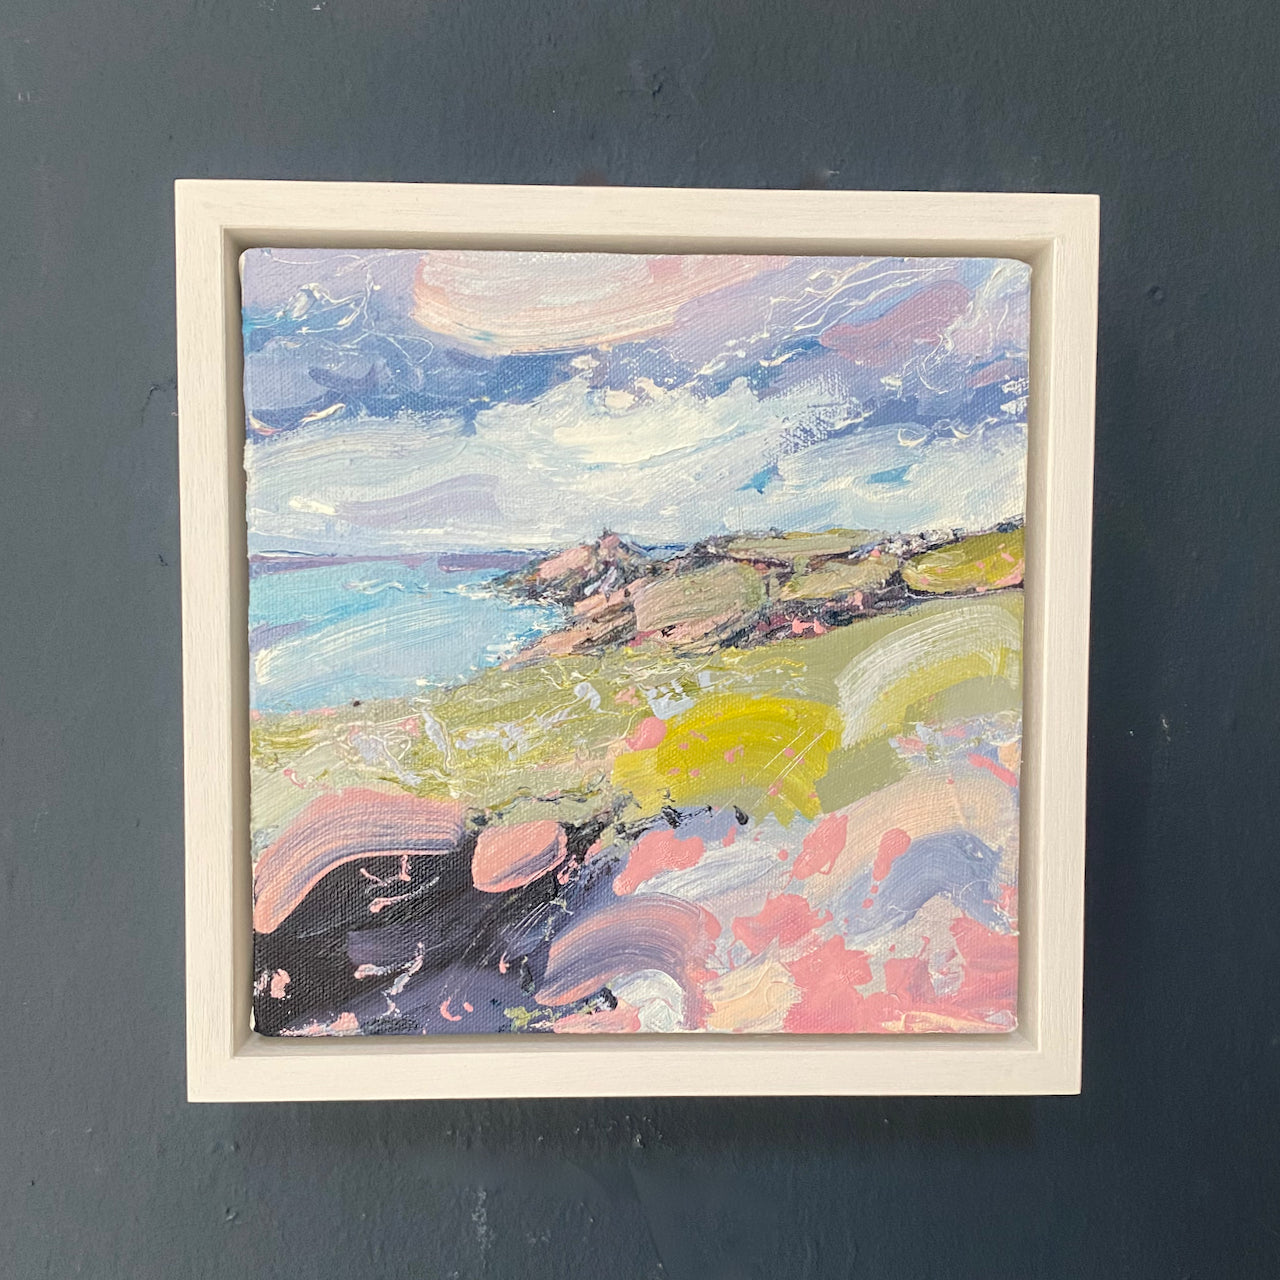 colourful Jill Hudson oil painting of Rame Head in south east Cornwall: the headland is green and pink under a blue sky with white clouds and the foreground has yellow and pink abstract wildflowers 